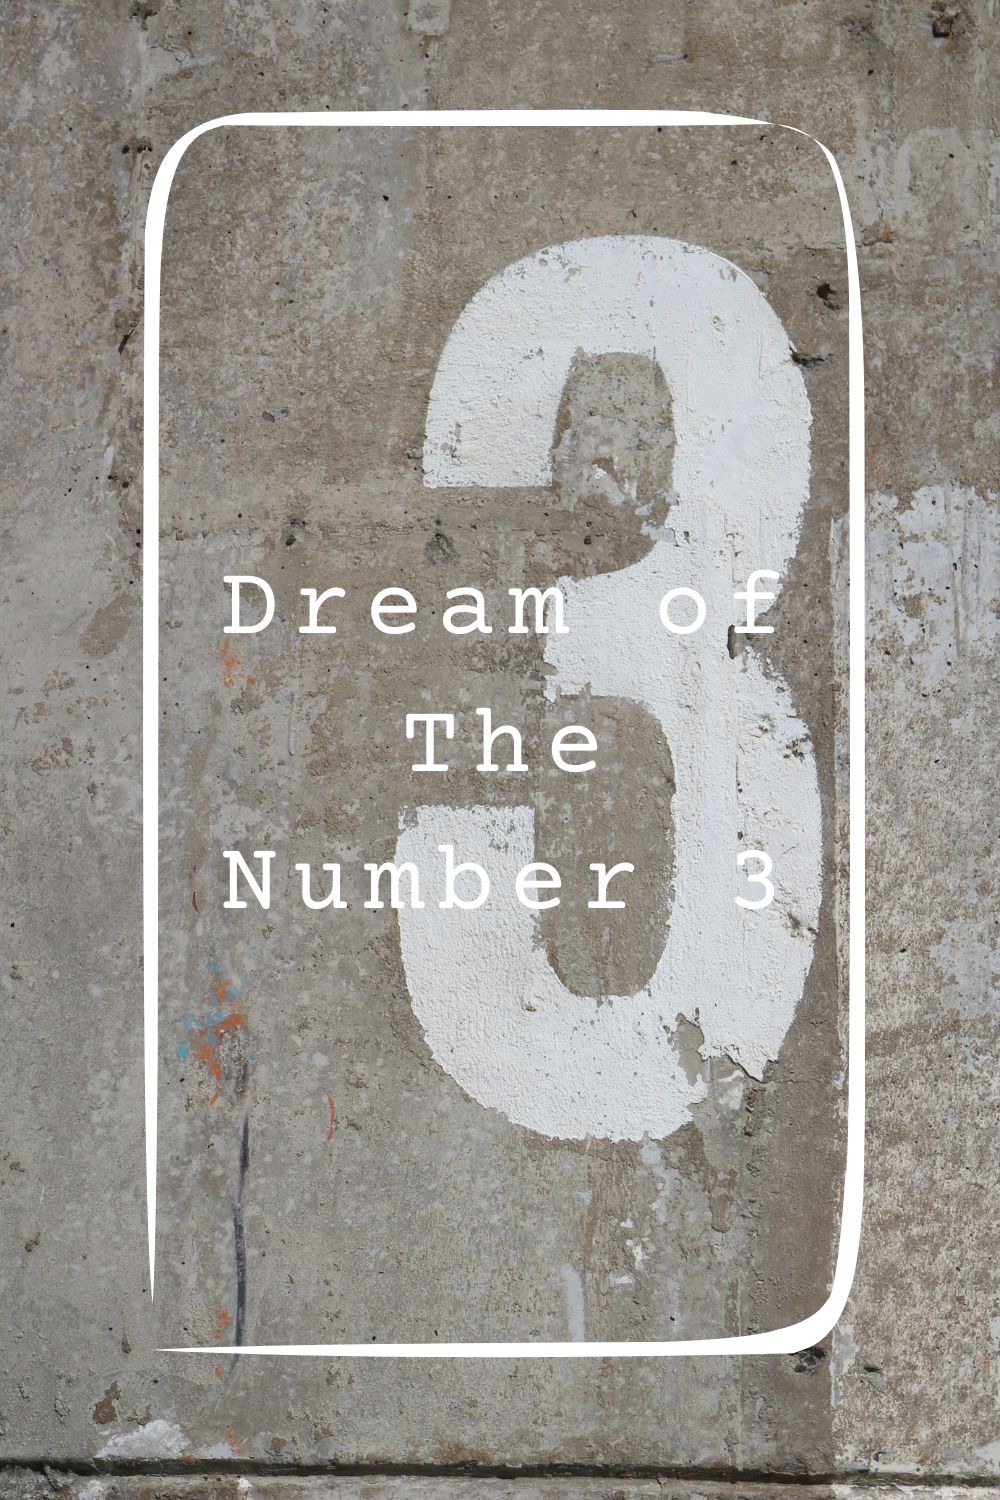 10 Dream of The Number 3 Meanings1